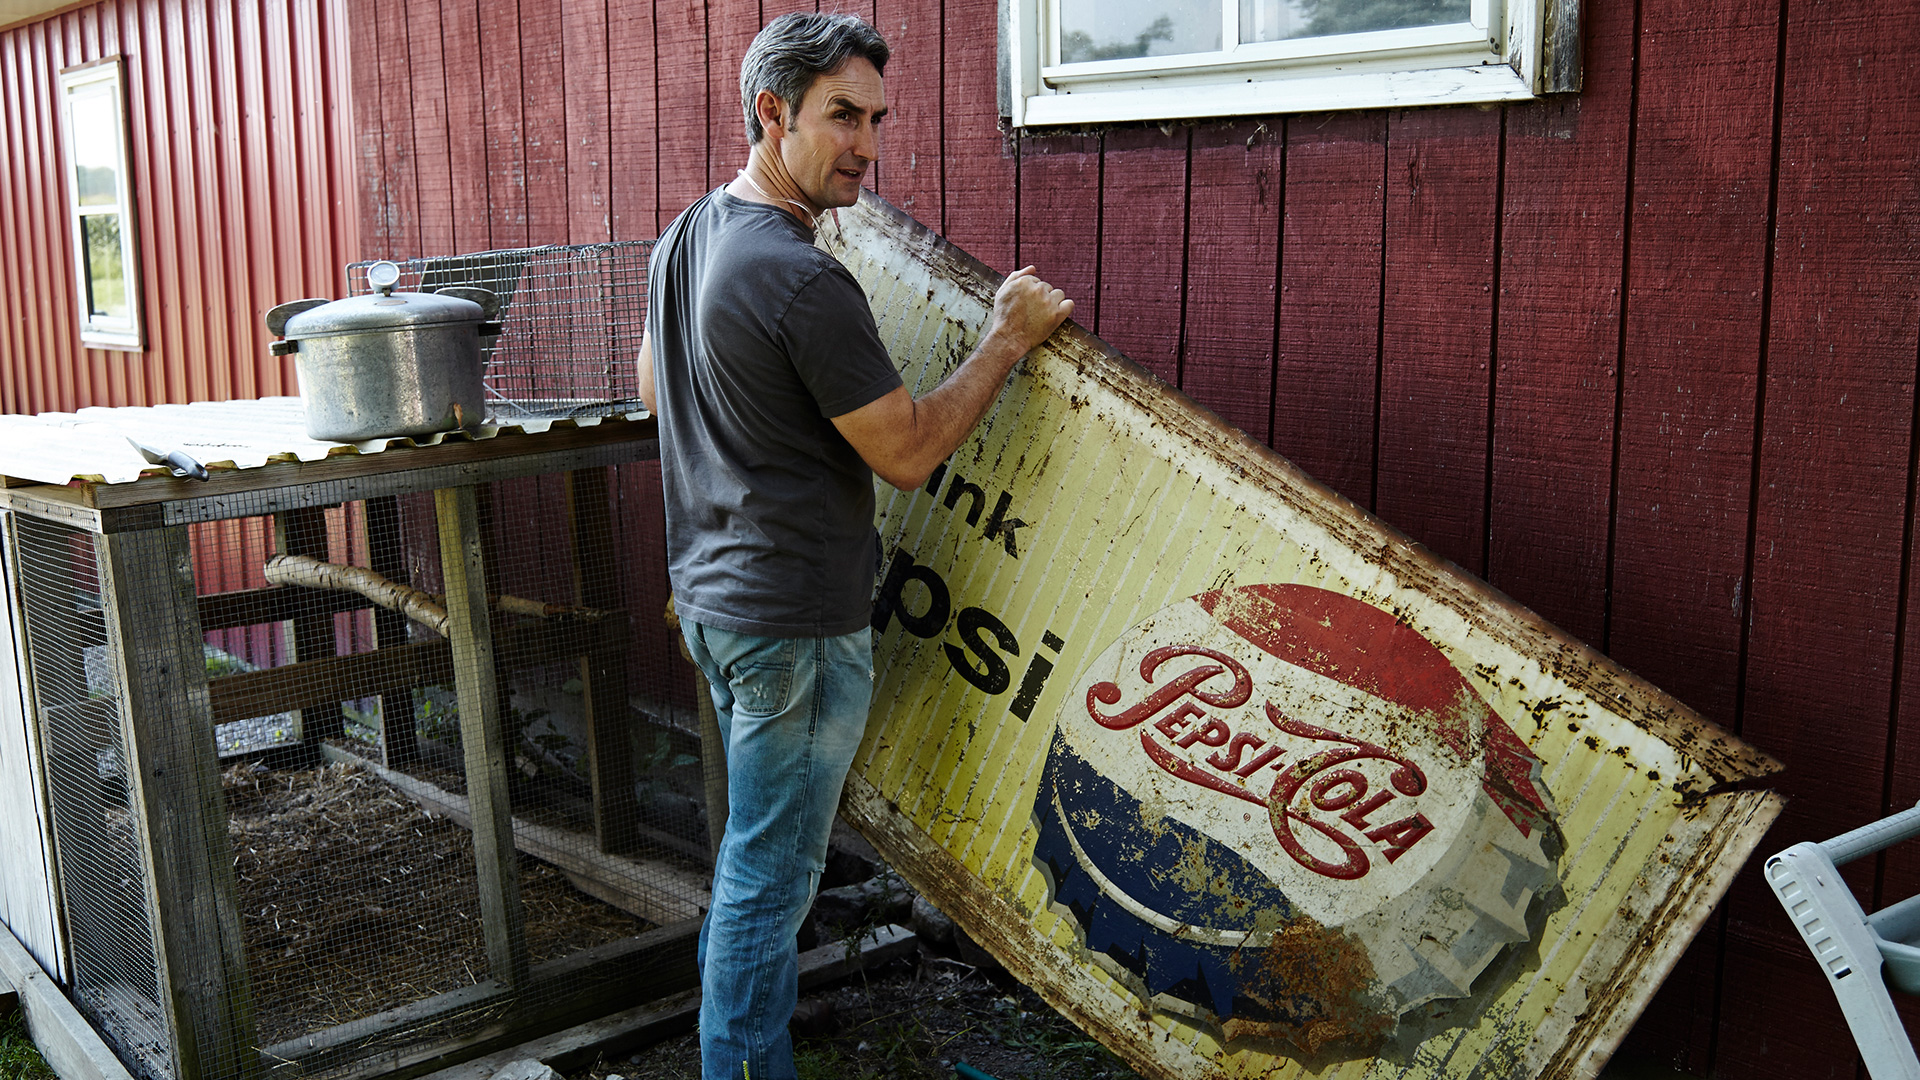 American Pickers’ Mike Wolfe gives a major update to the series. Fans are eagerly awaiting new episodes after a long hiatus.